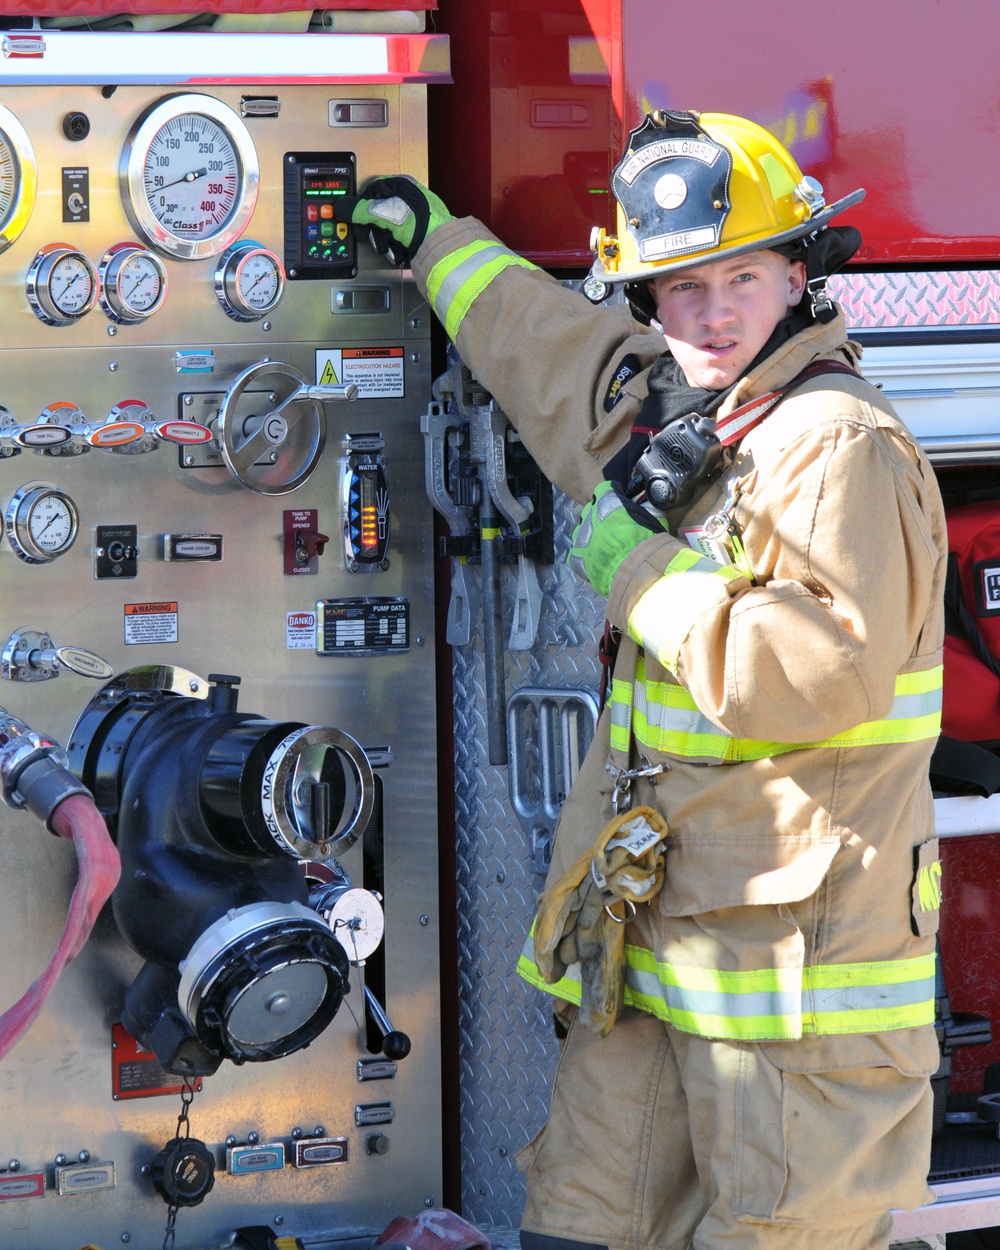 Senior Airman Benjamin McDermott, 185th Air Refueling Wing Fire Department, monitors the controls on the firetruck during a Federal Aviation Administration mass casualty exercise held at the Sioux Gateway airport/Col. Bud Day Field, on May 1, 2021.  U.S.